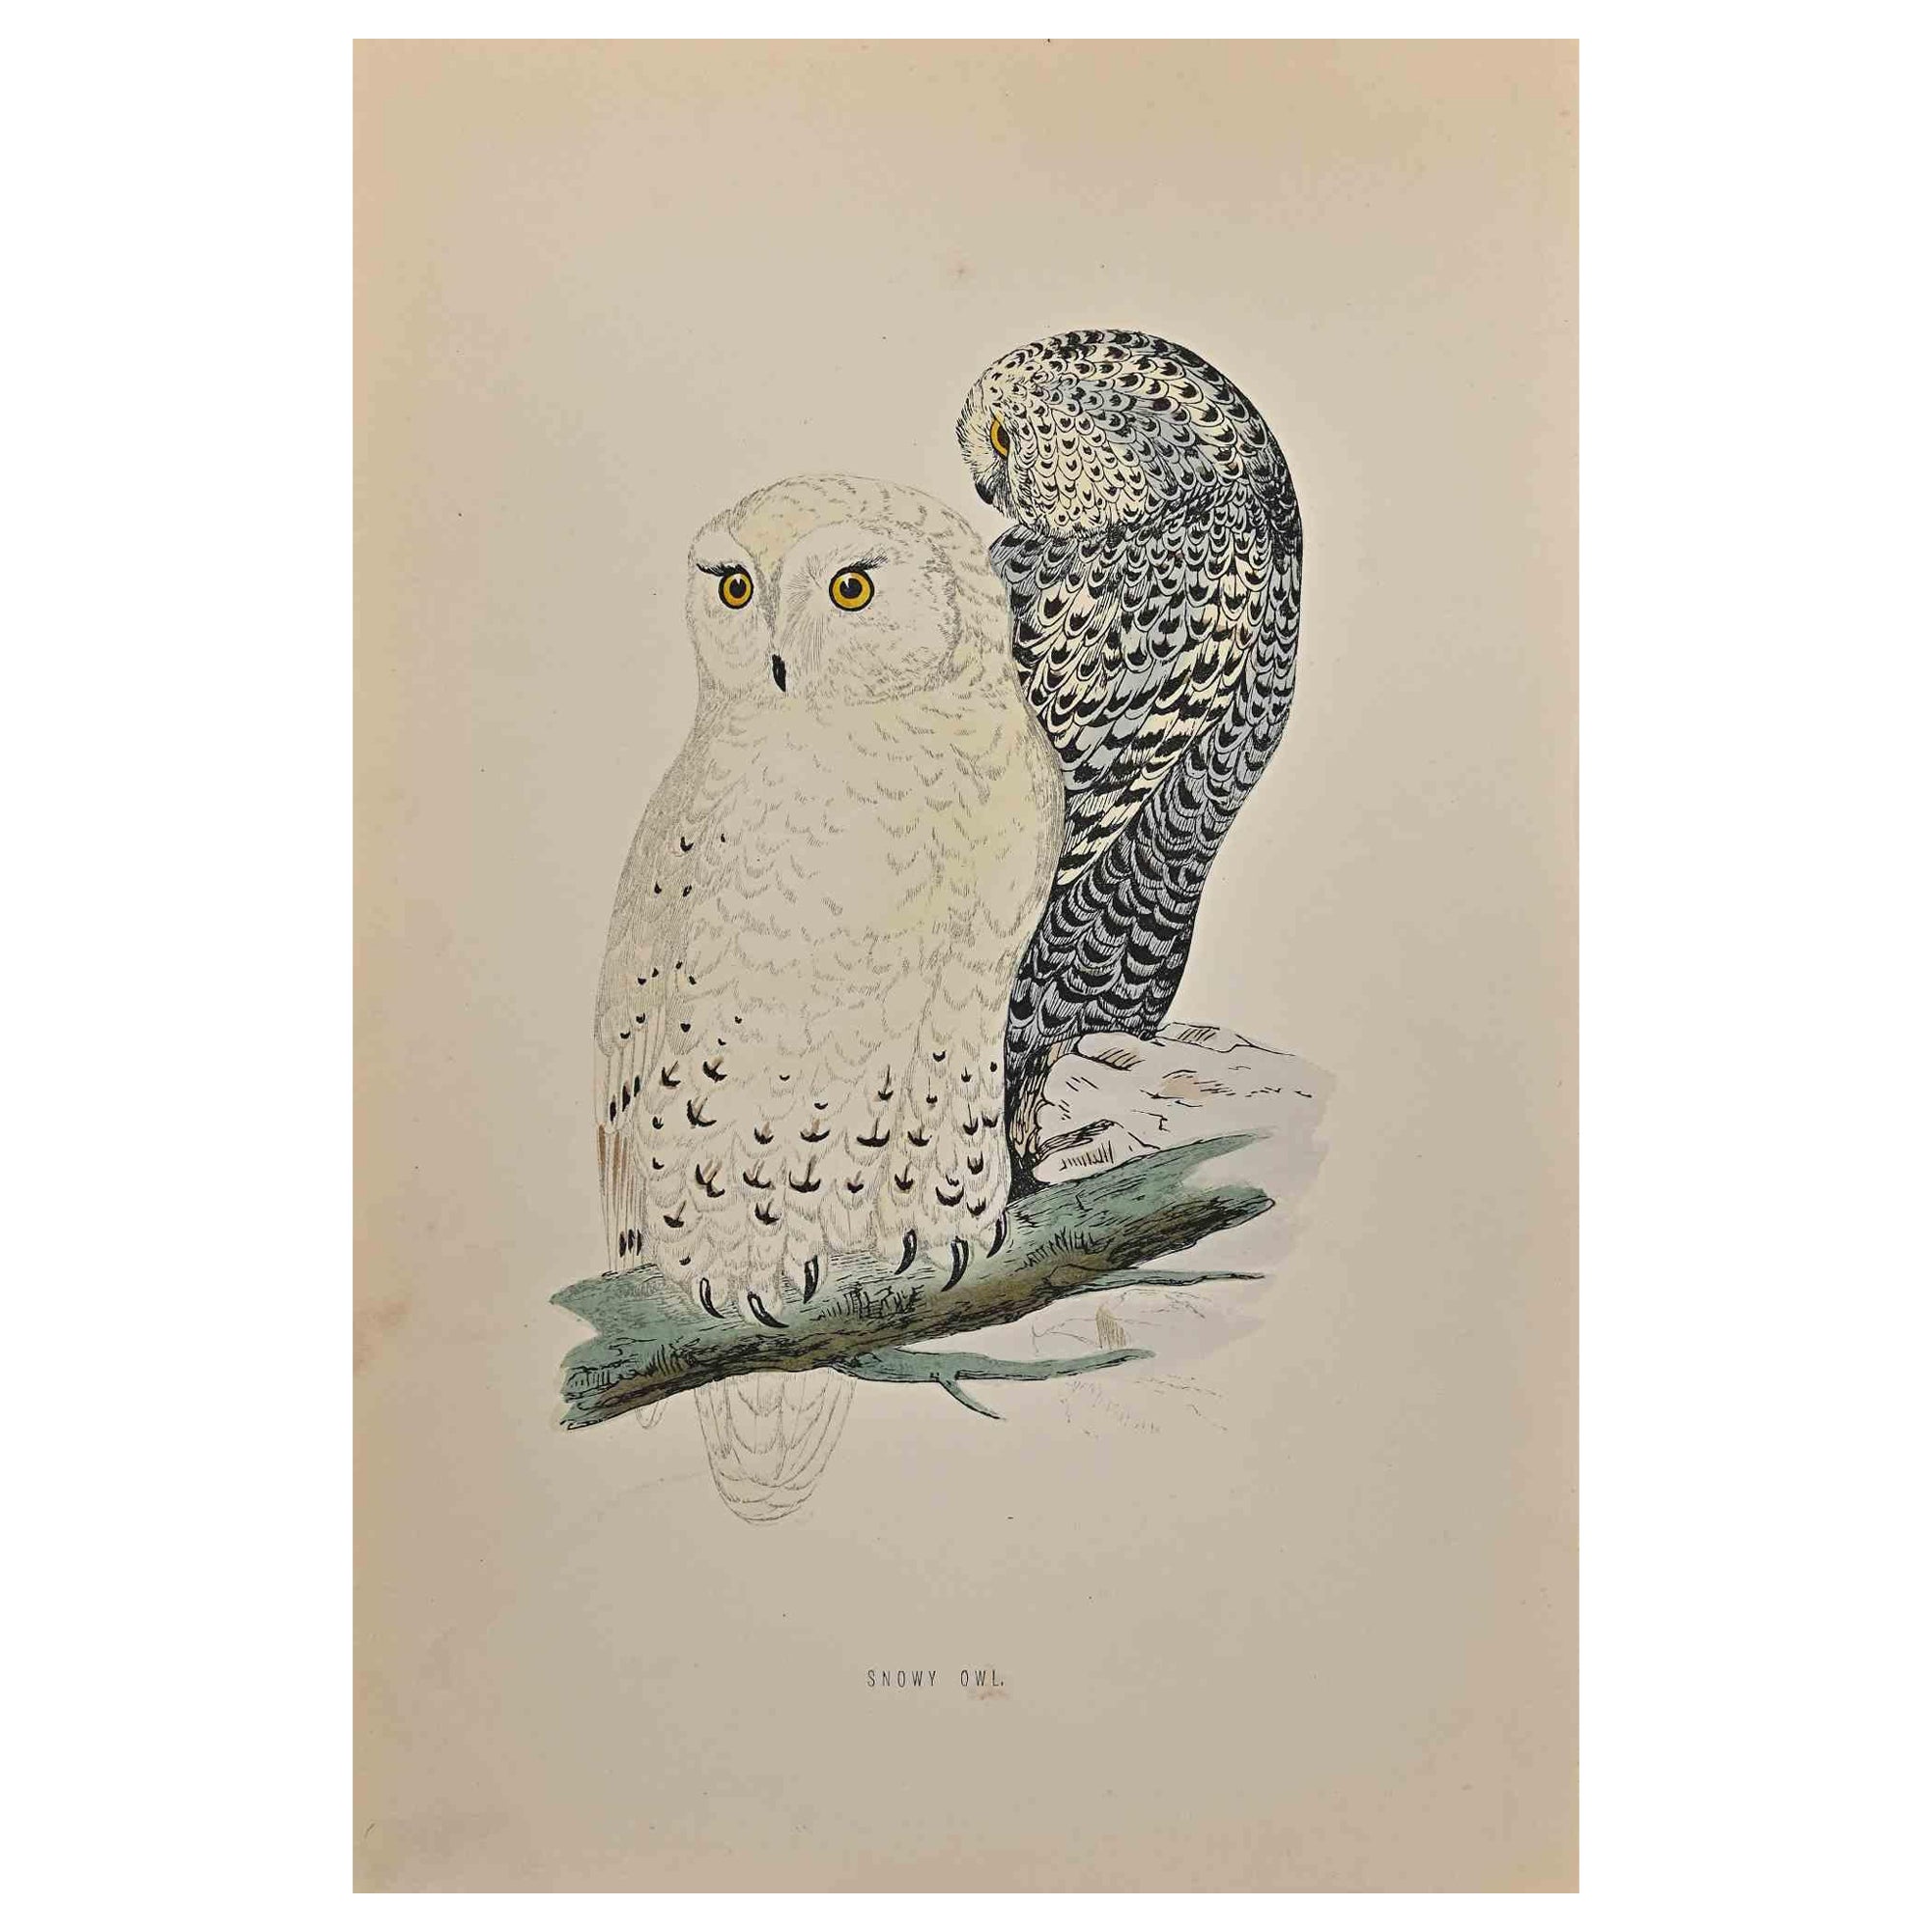  Snowy Owl a modern artwork realized in 1870 by the British artist Alexander Francis Lydon (1836-1917) . 

Woodcut print, hand colored, published by London, Bell & Sons, 1870.  Name of the bird printed in plate. This work is part of a print suite